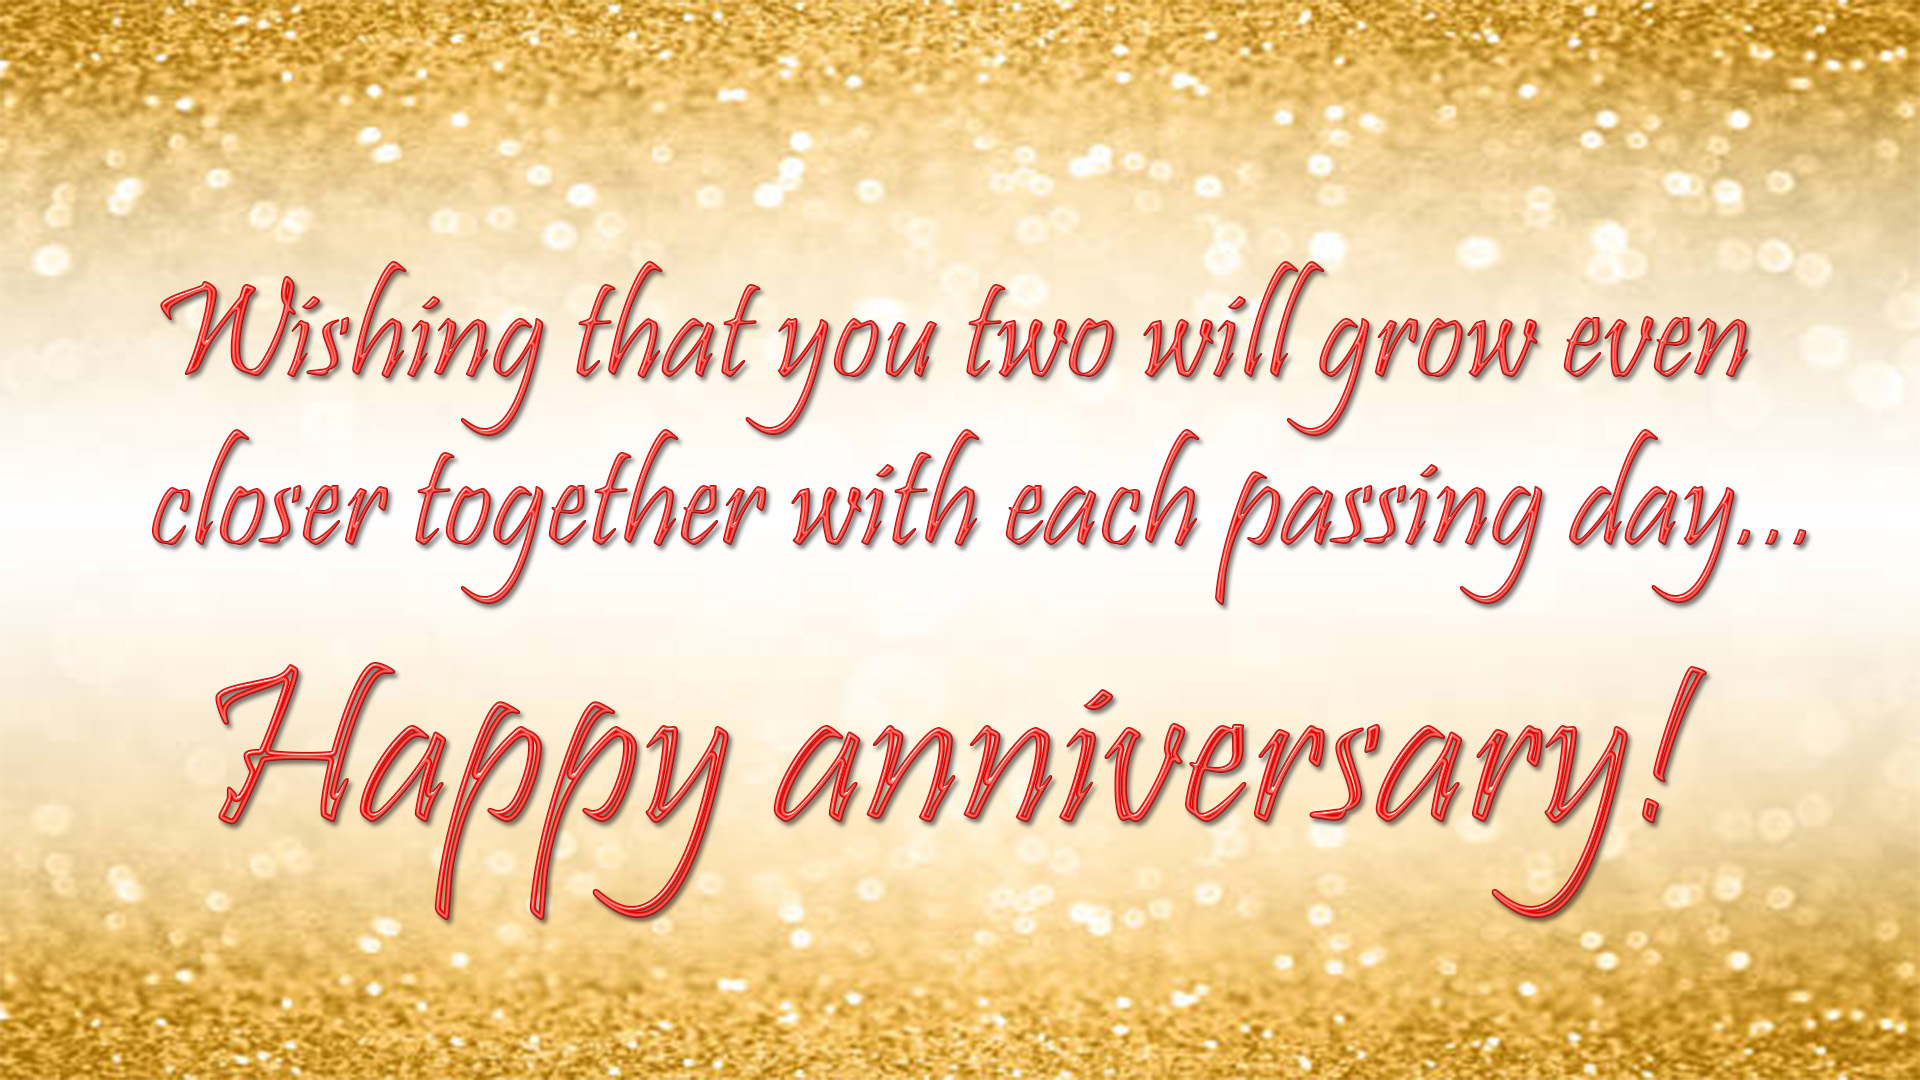 Wedding Anniversary Wishes Greeting Cards Images - Calligraphy - HD Wallpaper 